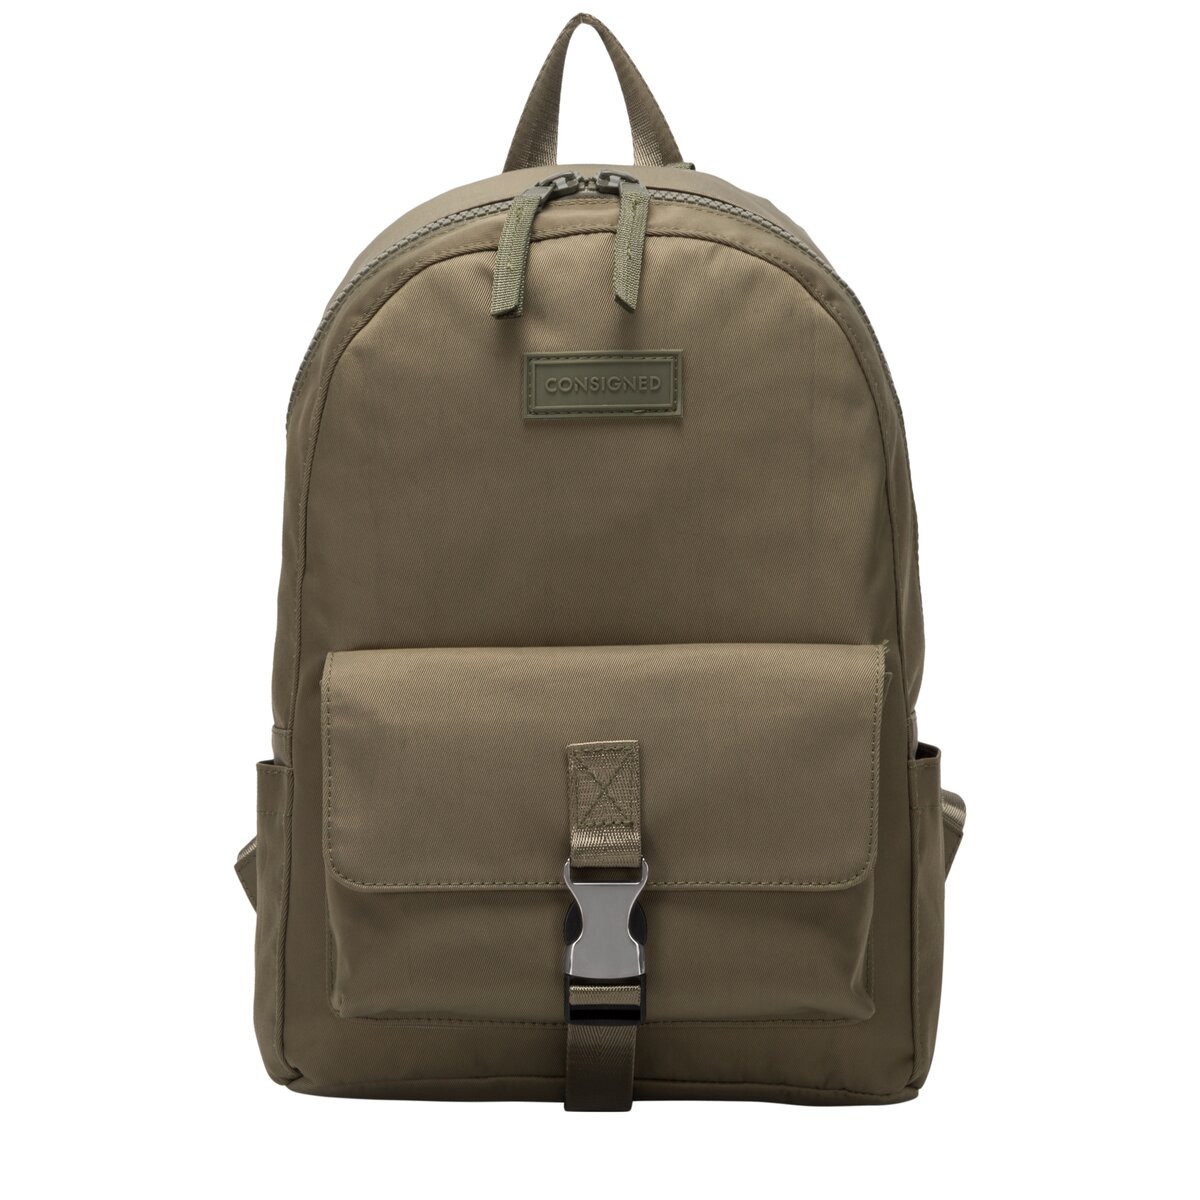 CONSIGNED - Finlay Clip Xs Backpack